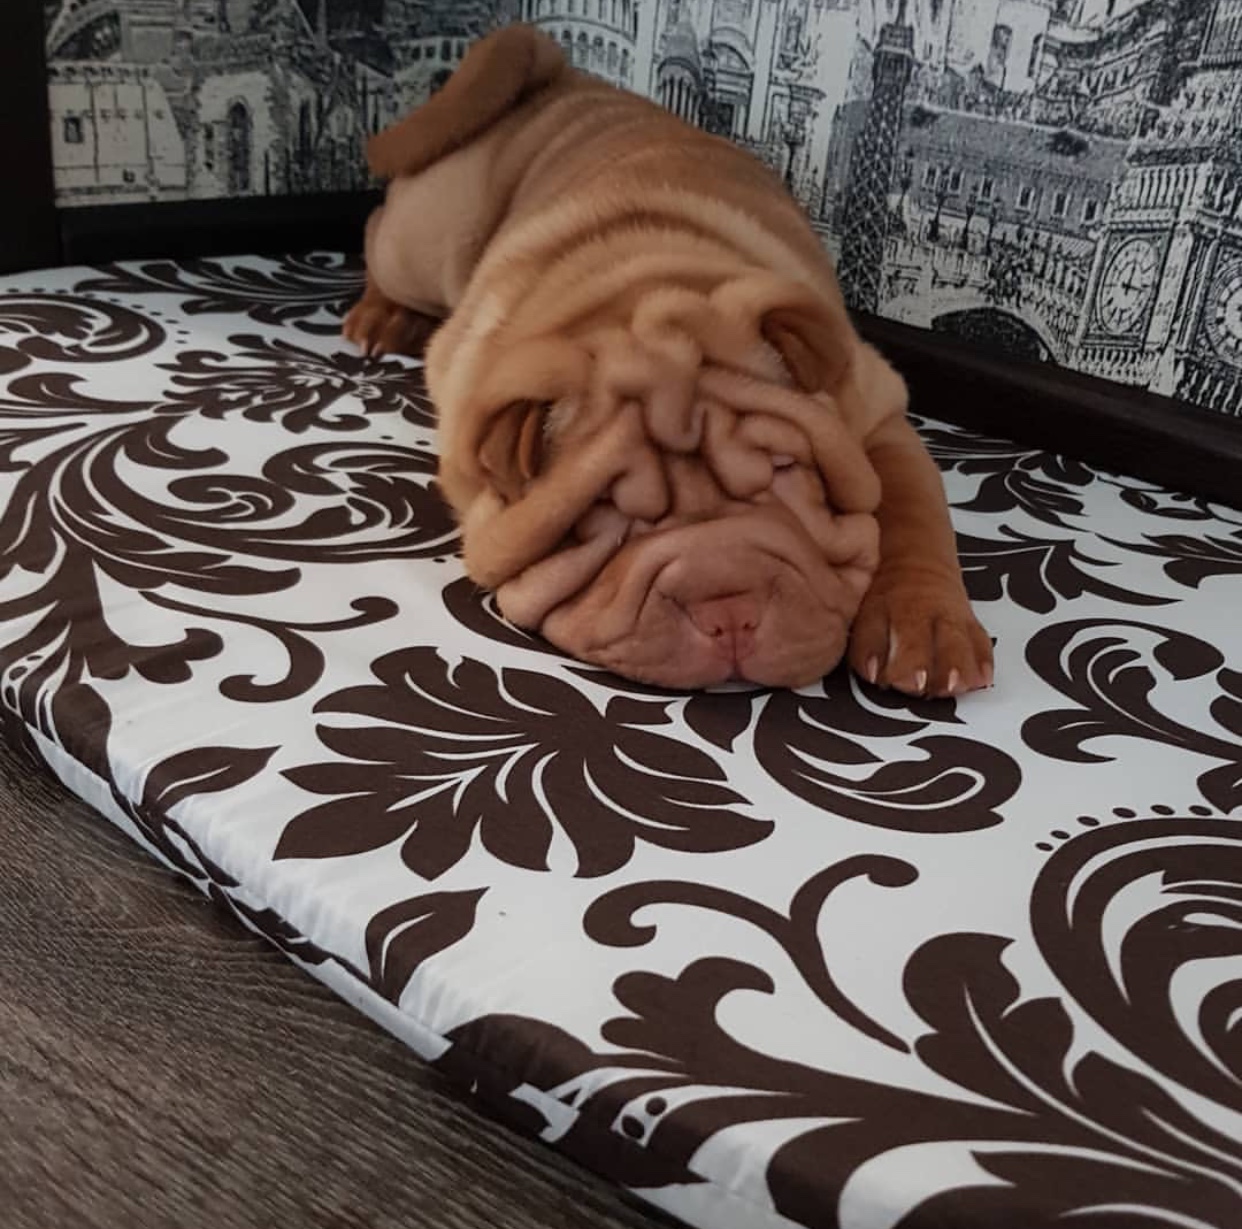 A Shar-Pei sleeping soundly on its bed